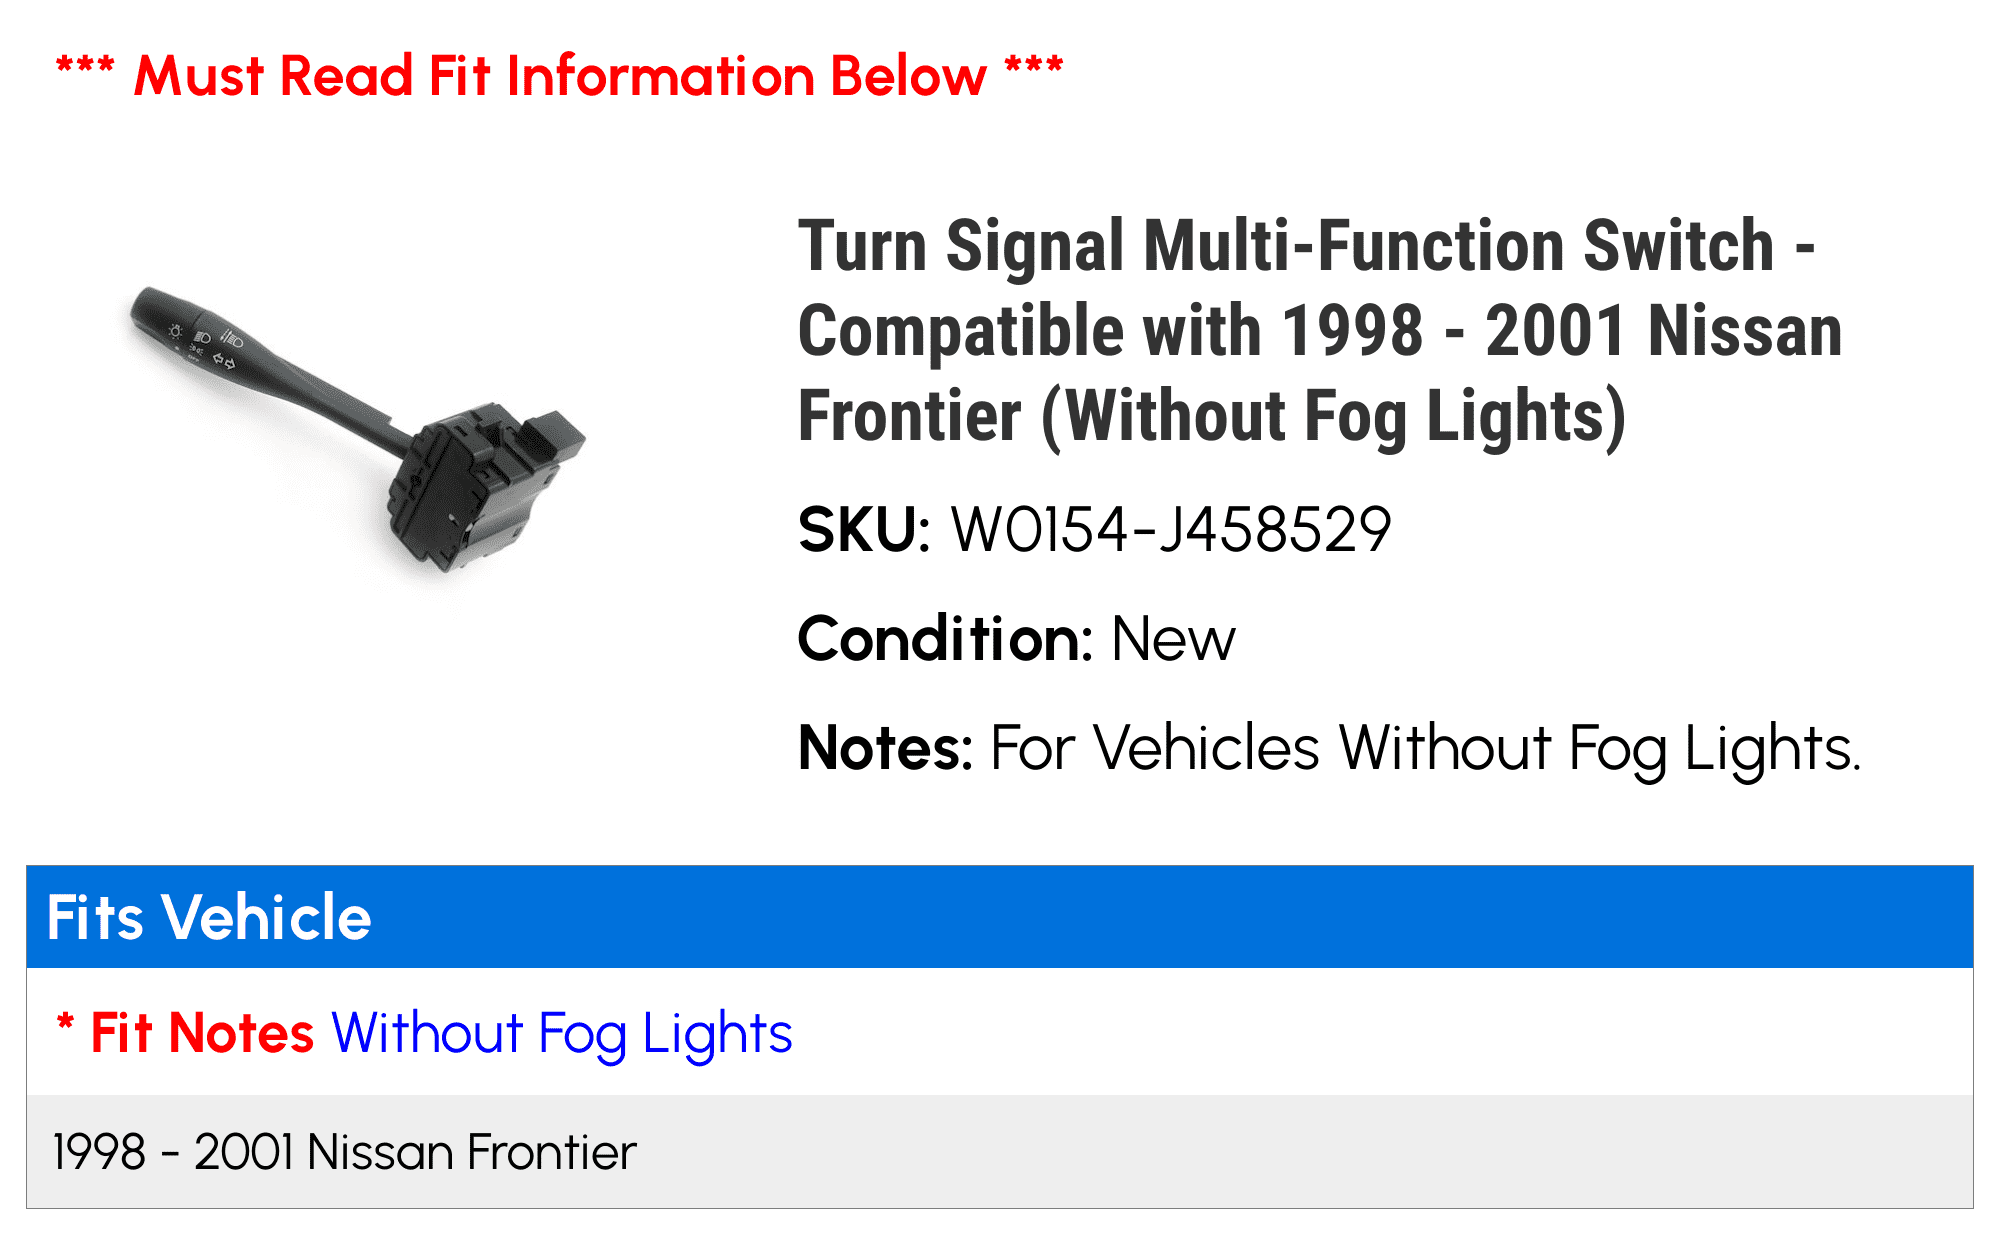 Multi-Function Switch Compatible With Nissan 